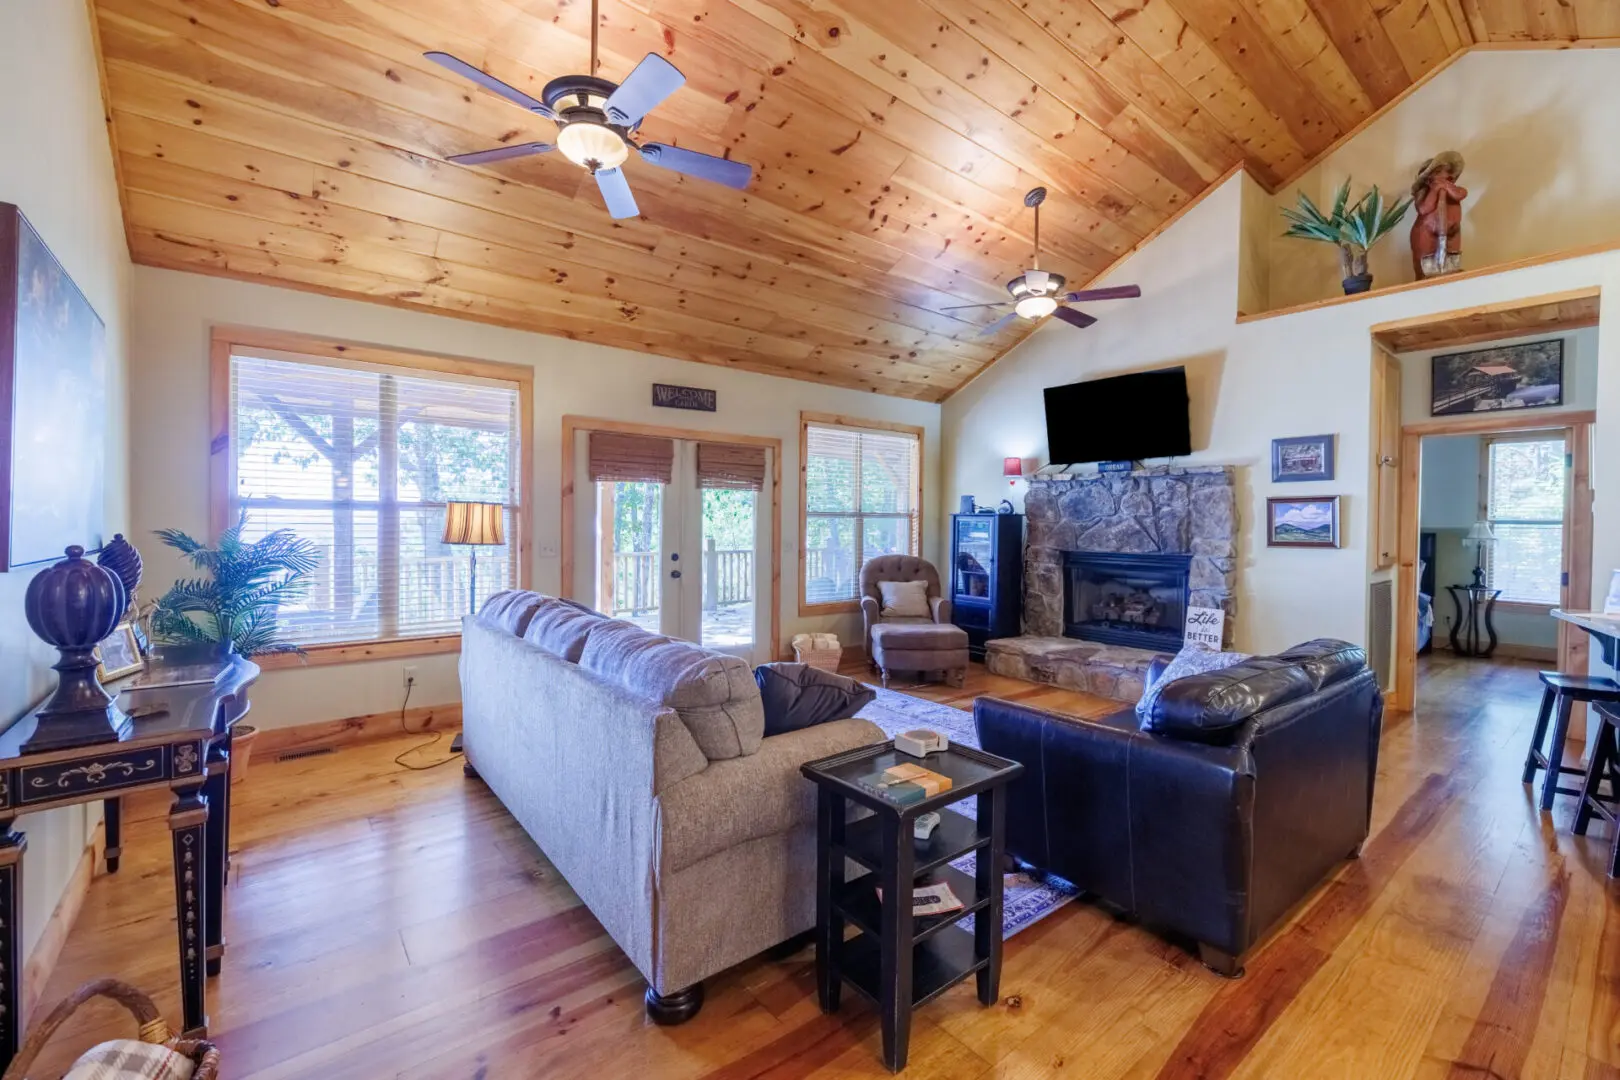 A living room with wood floors and a ceiling fan.